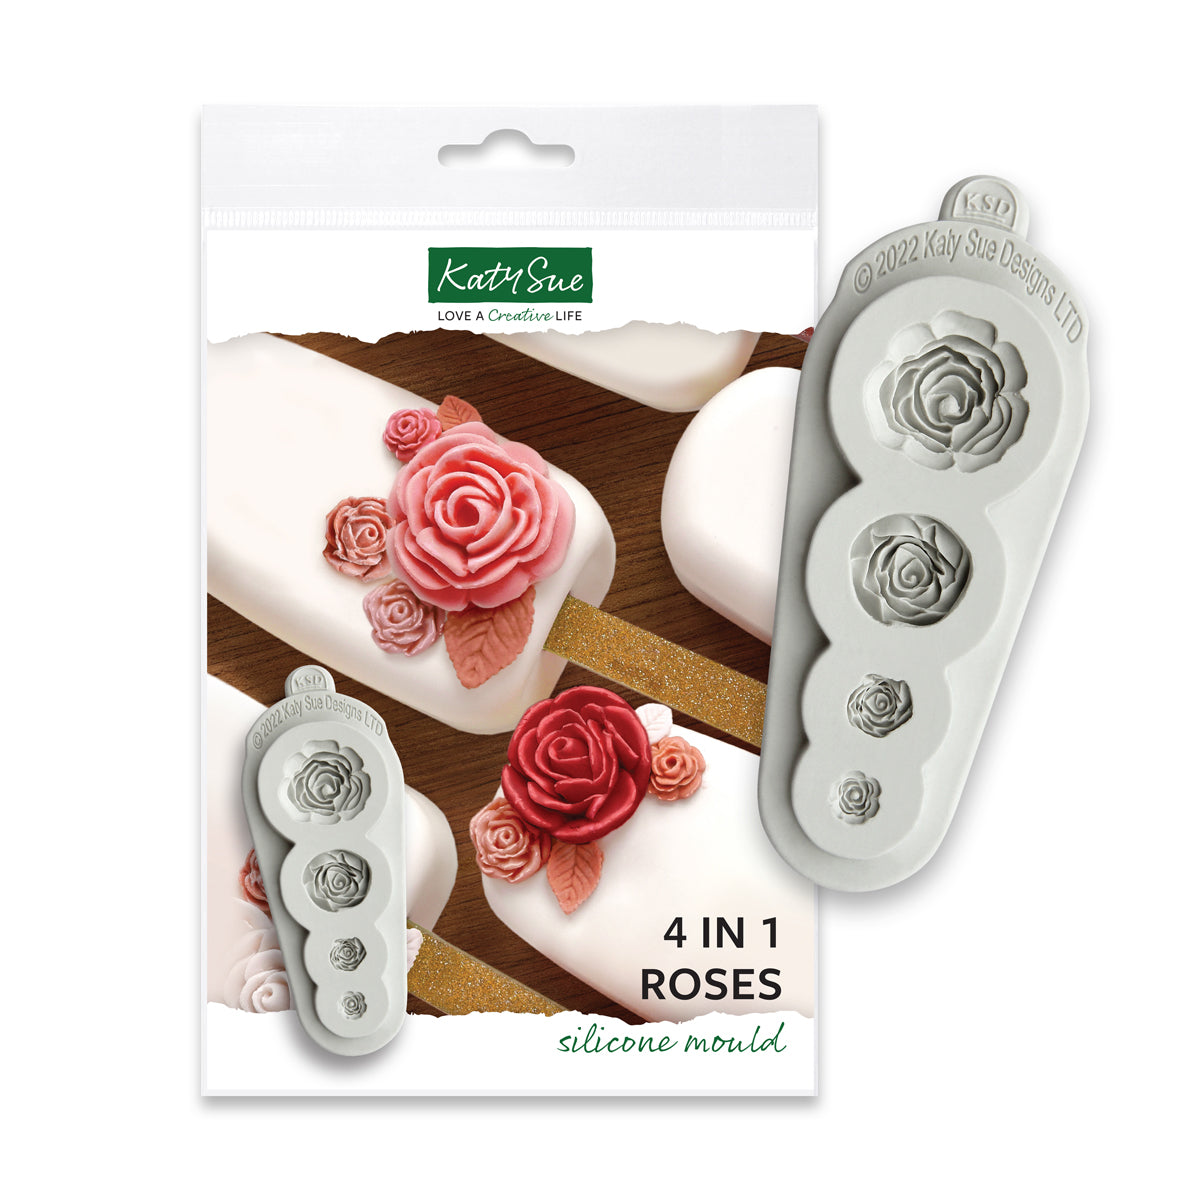 Roses 4 in 1 Silicone Mould